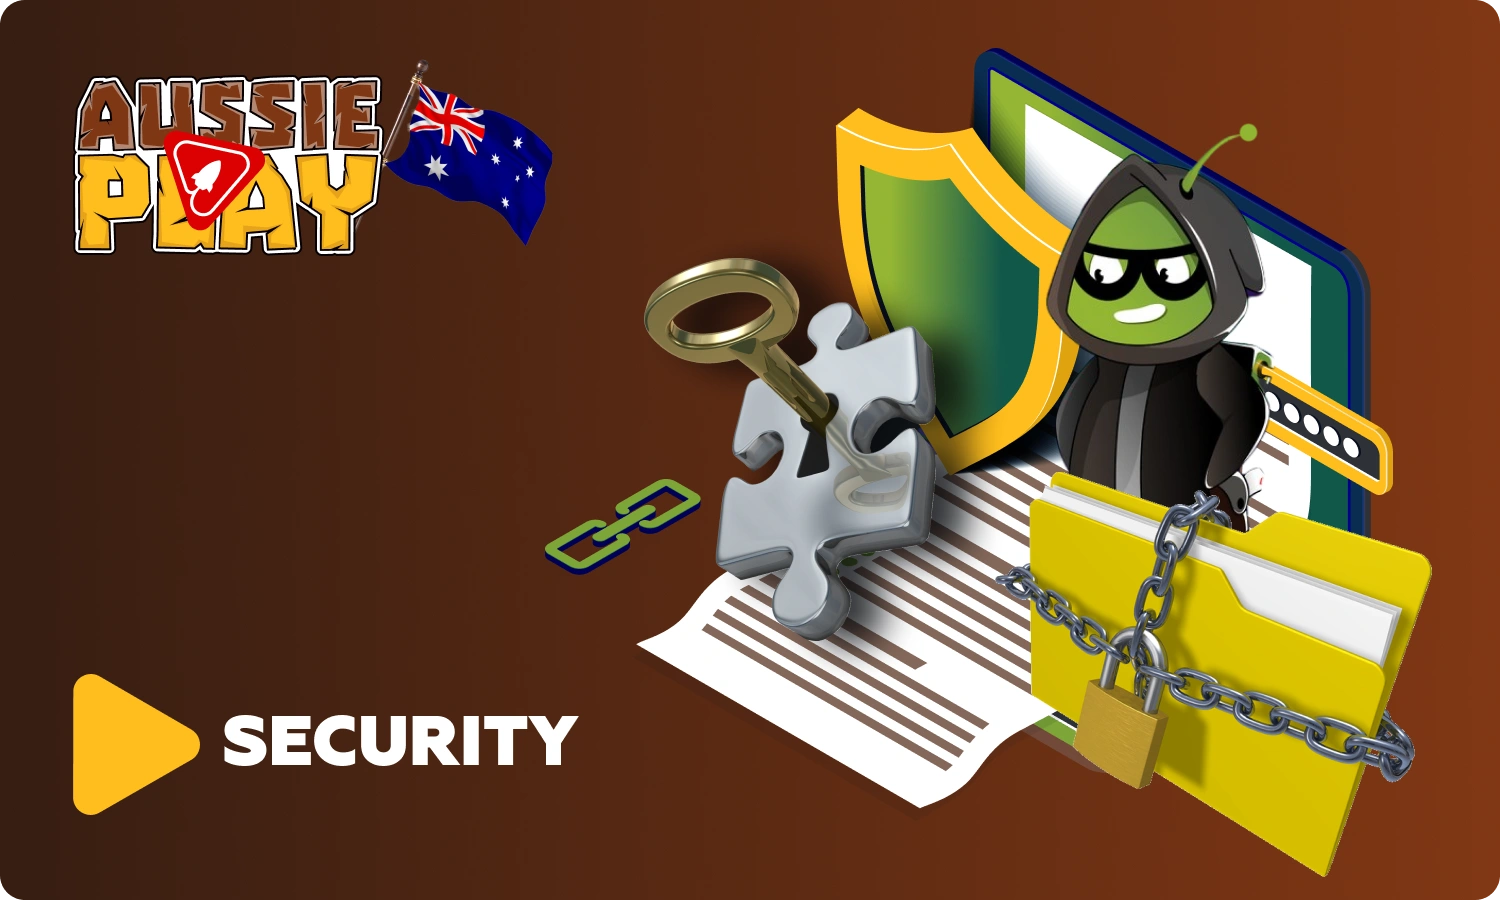 Security measures at Aussie Play Casino include data transfer protection protocols to ensure the protection of Australian players